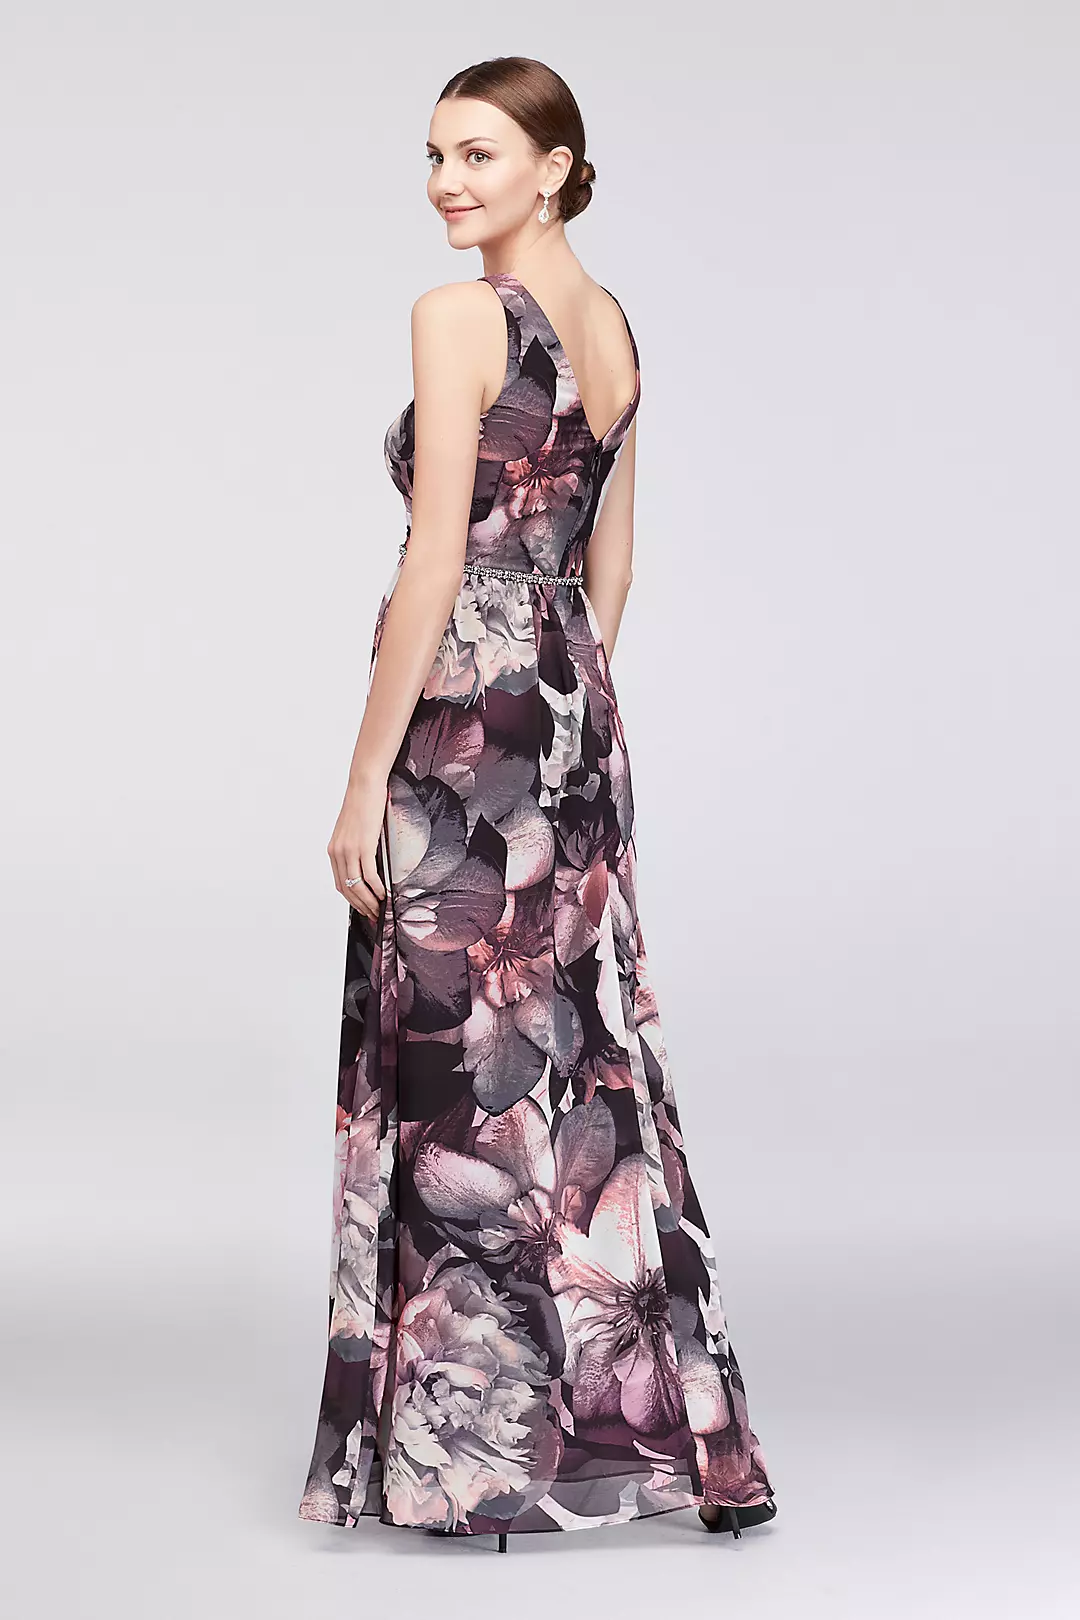 Floral Chiffon Surplice Gown with Beaded Waist Image 2